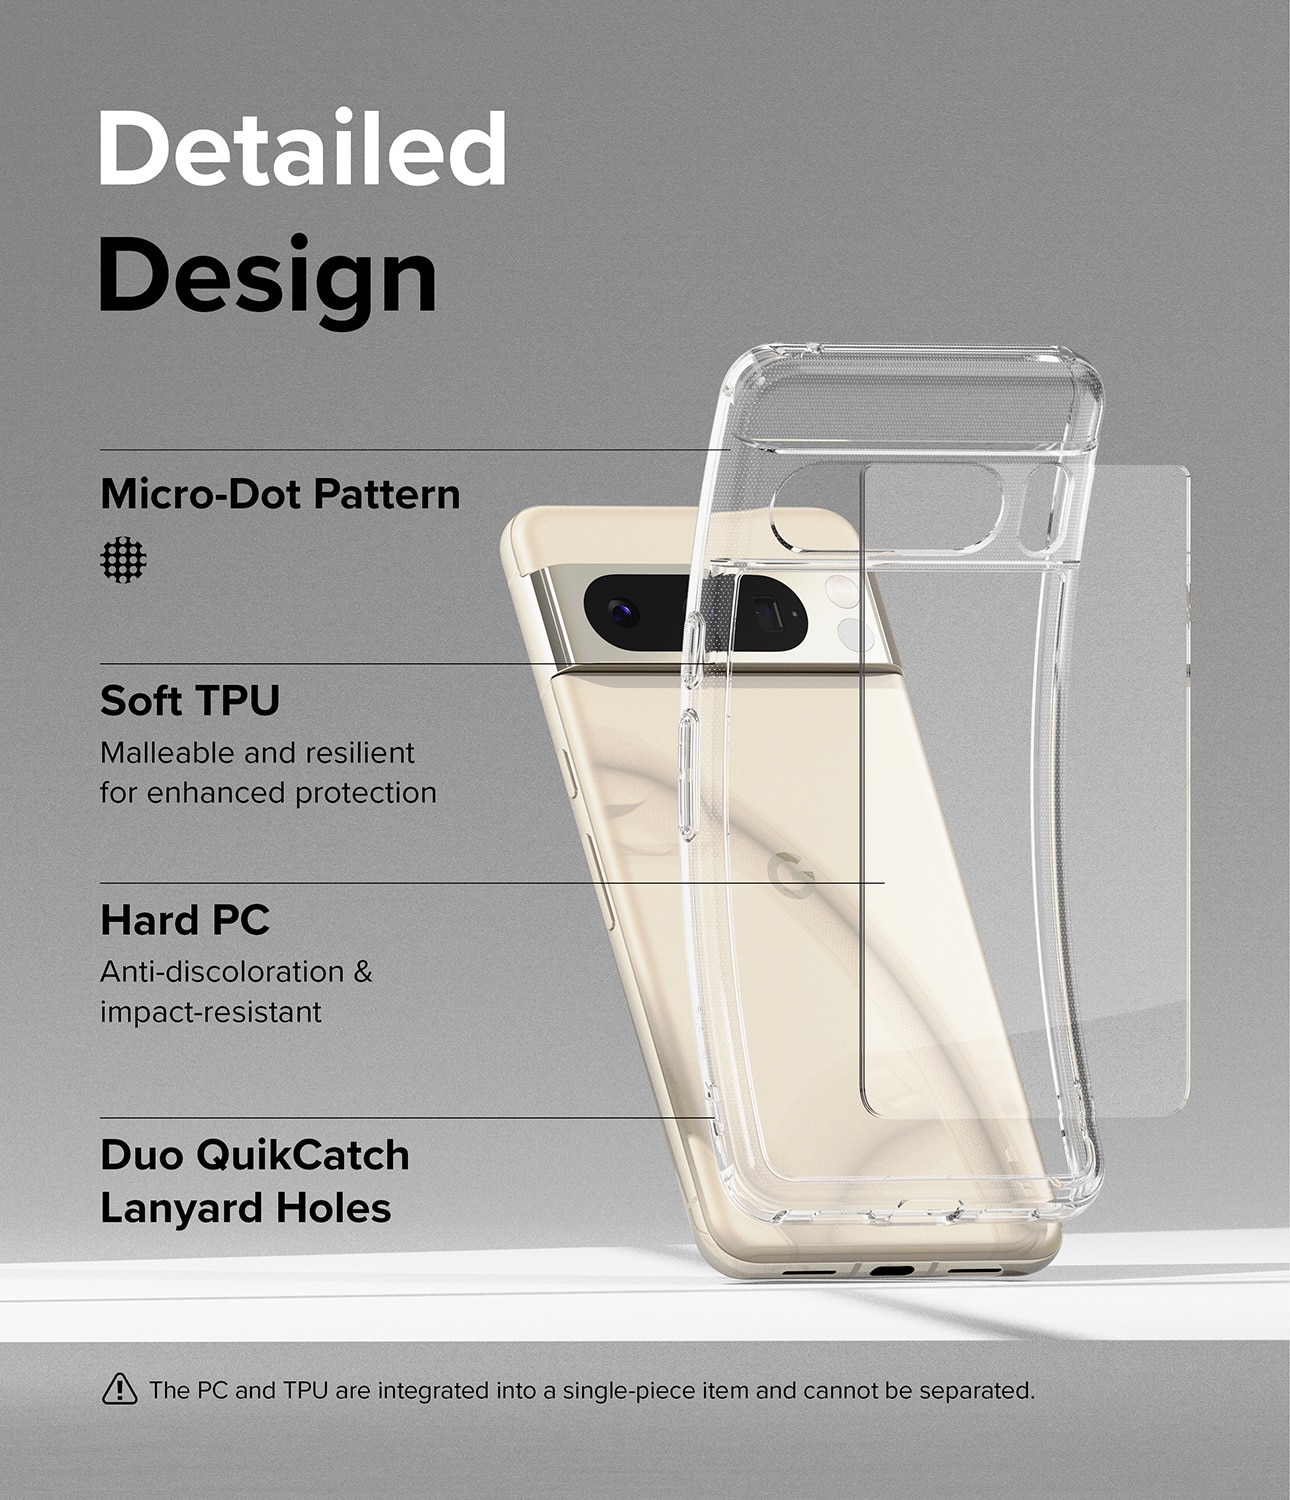 Cover Fusion Google Pixel 8 Pro Clear